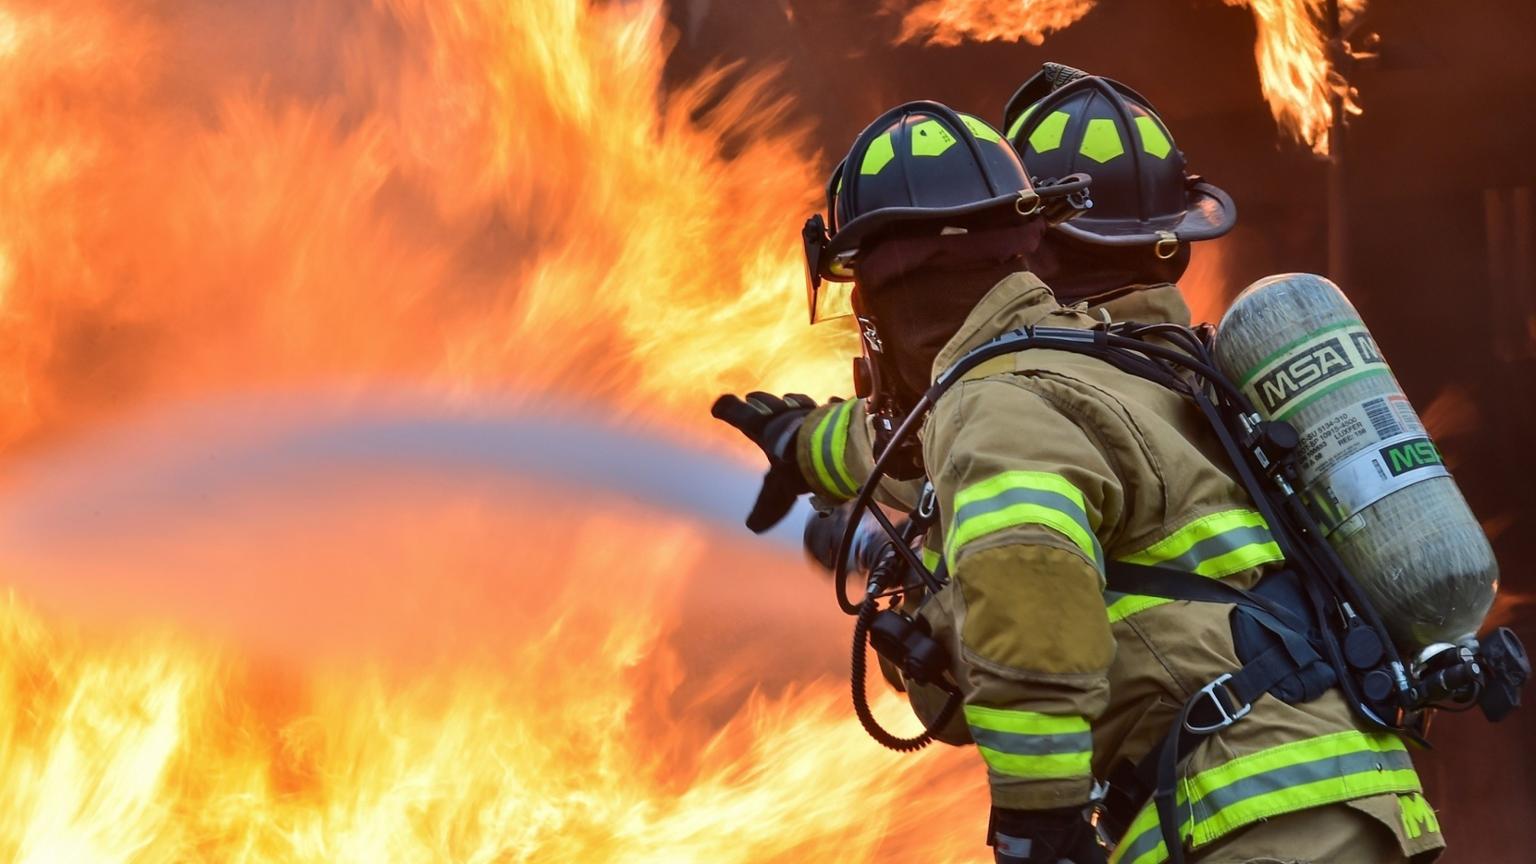 This photo shows a firefighter holding a hose fighting a big blaze